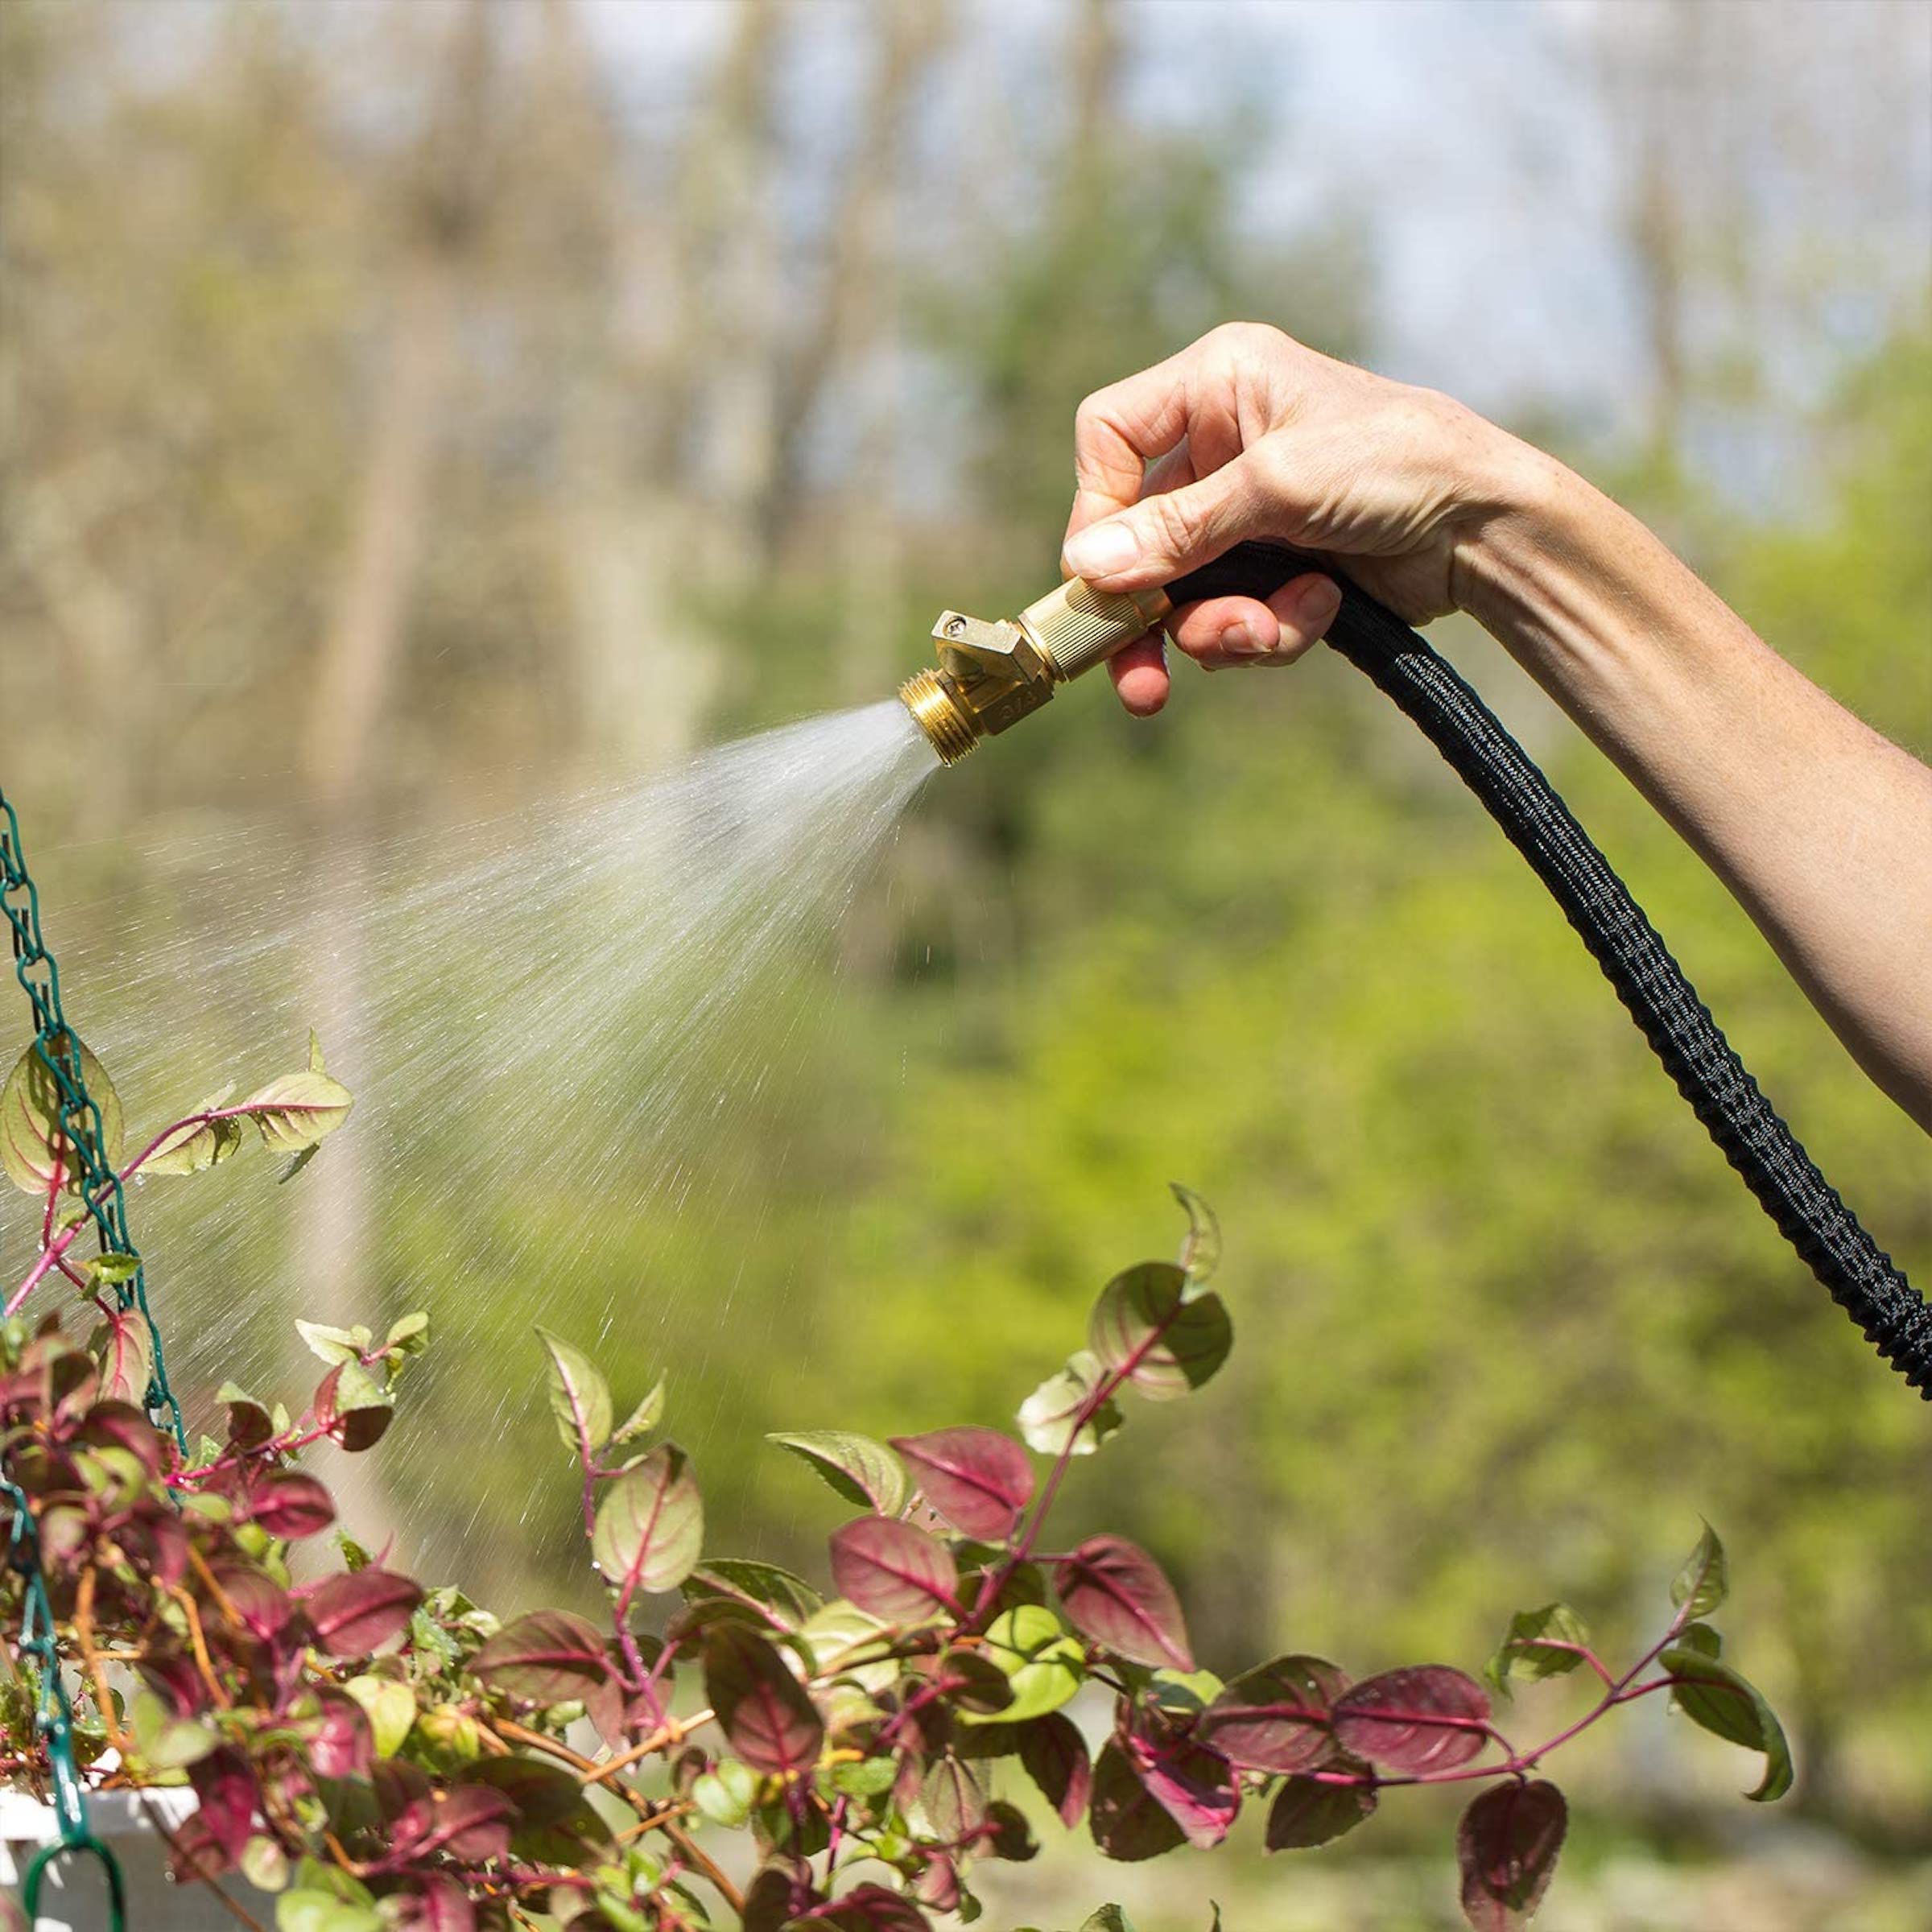 Garden Hose Quick Connect Reviews Find the Perfect Solution for Your Watering Needs